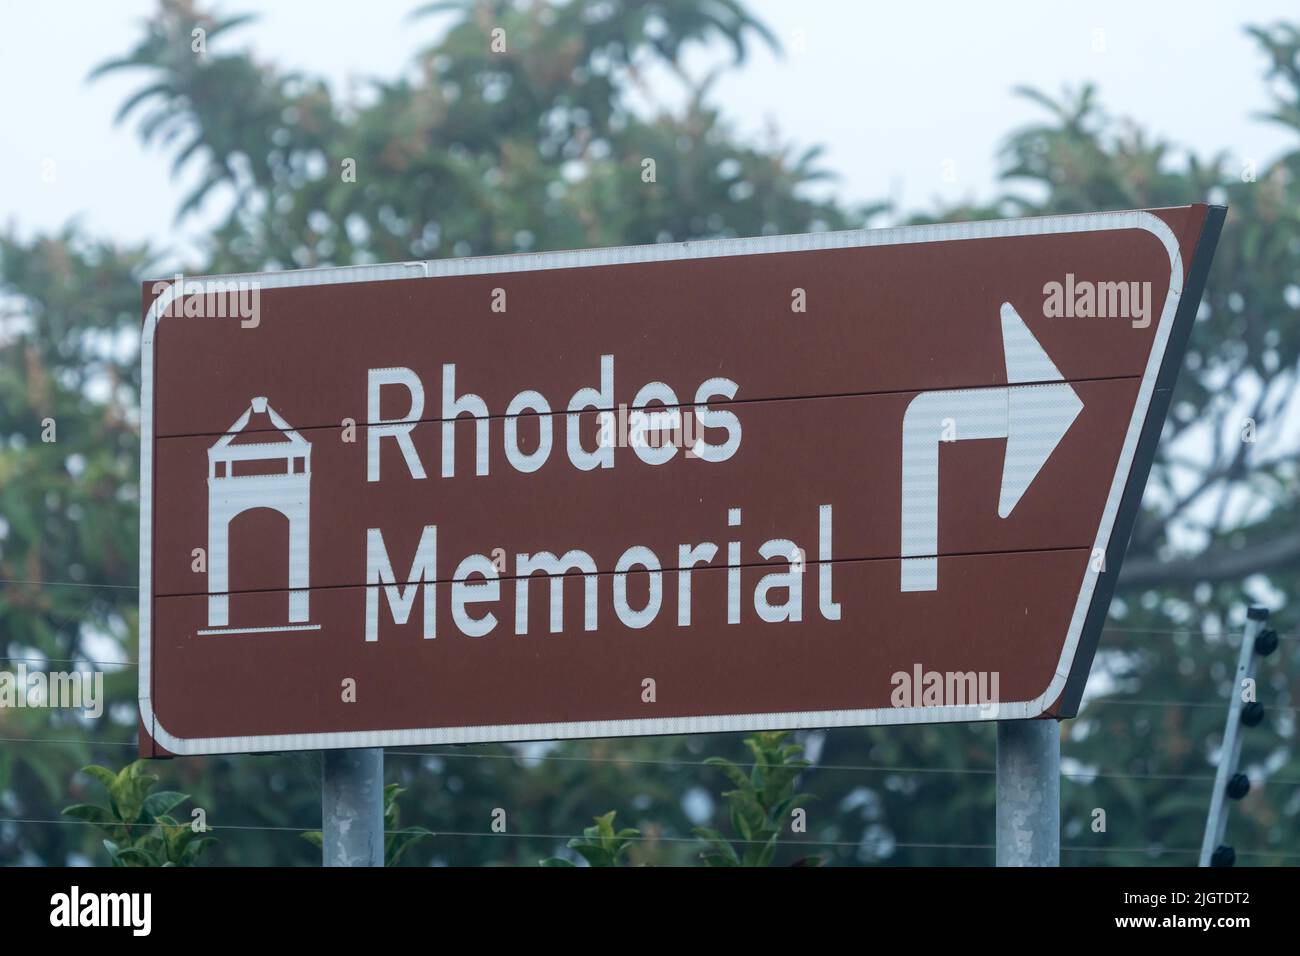 road sign or signage to Rhodes memorial which shows directional arrow towards tourist attraction or place of interest in Cape Town,South Africa Stock Photo